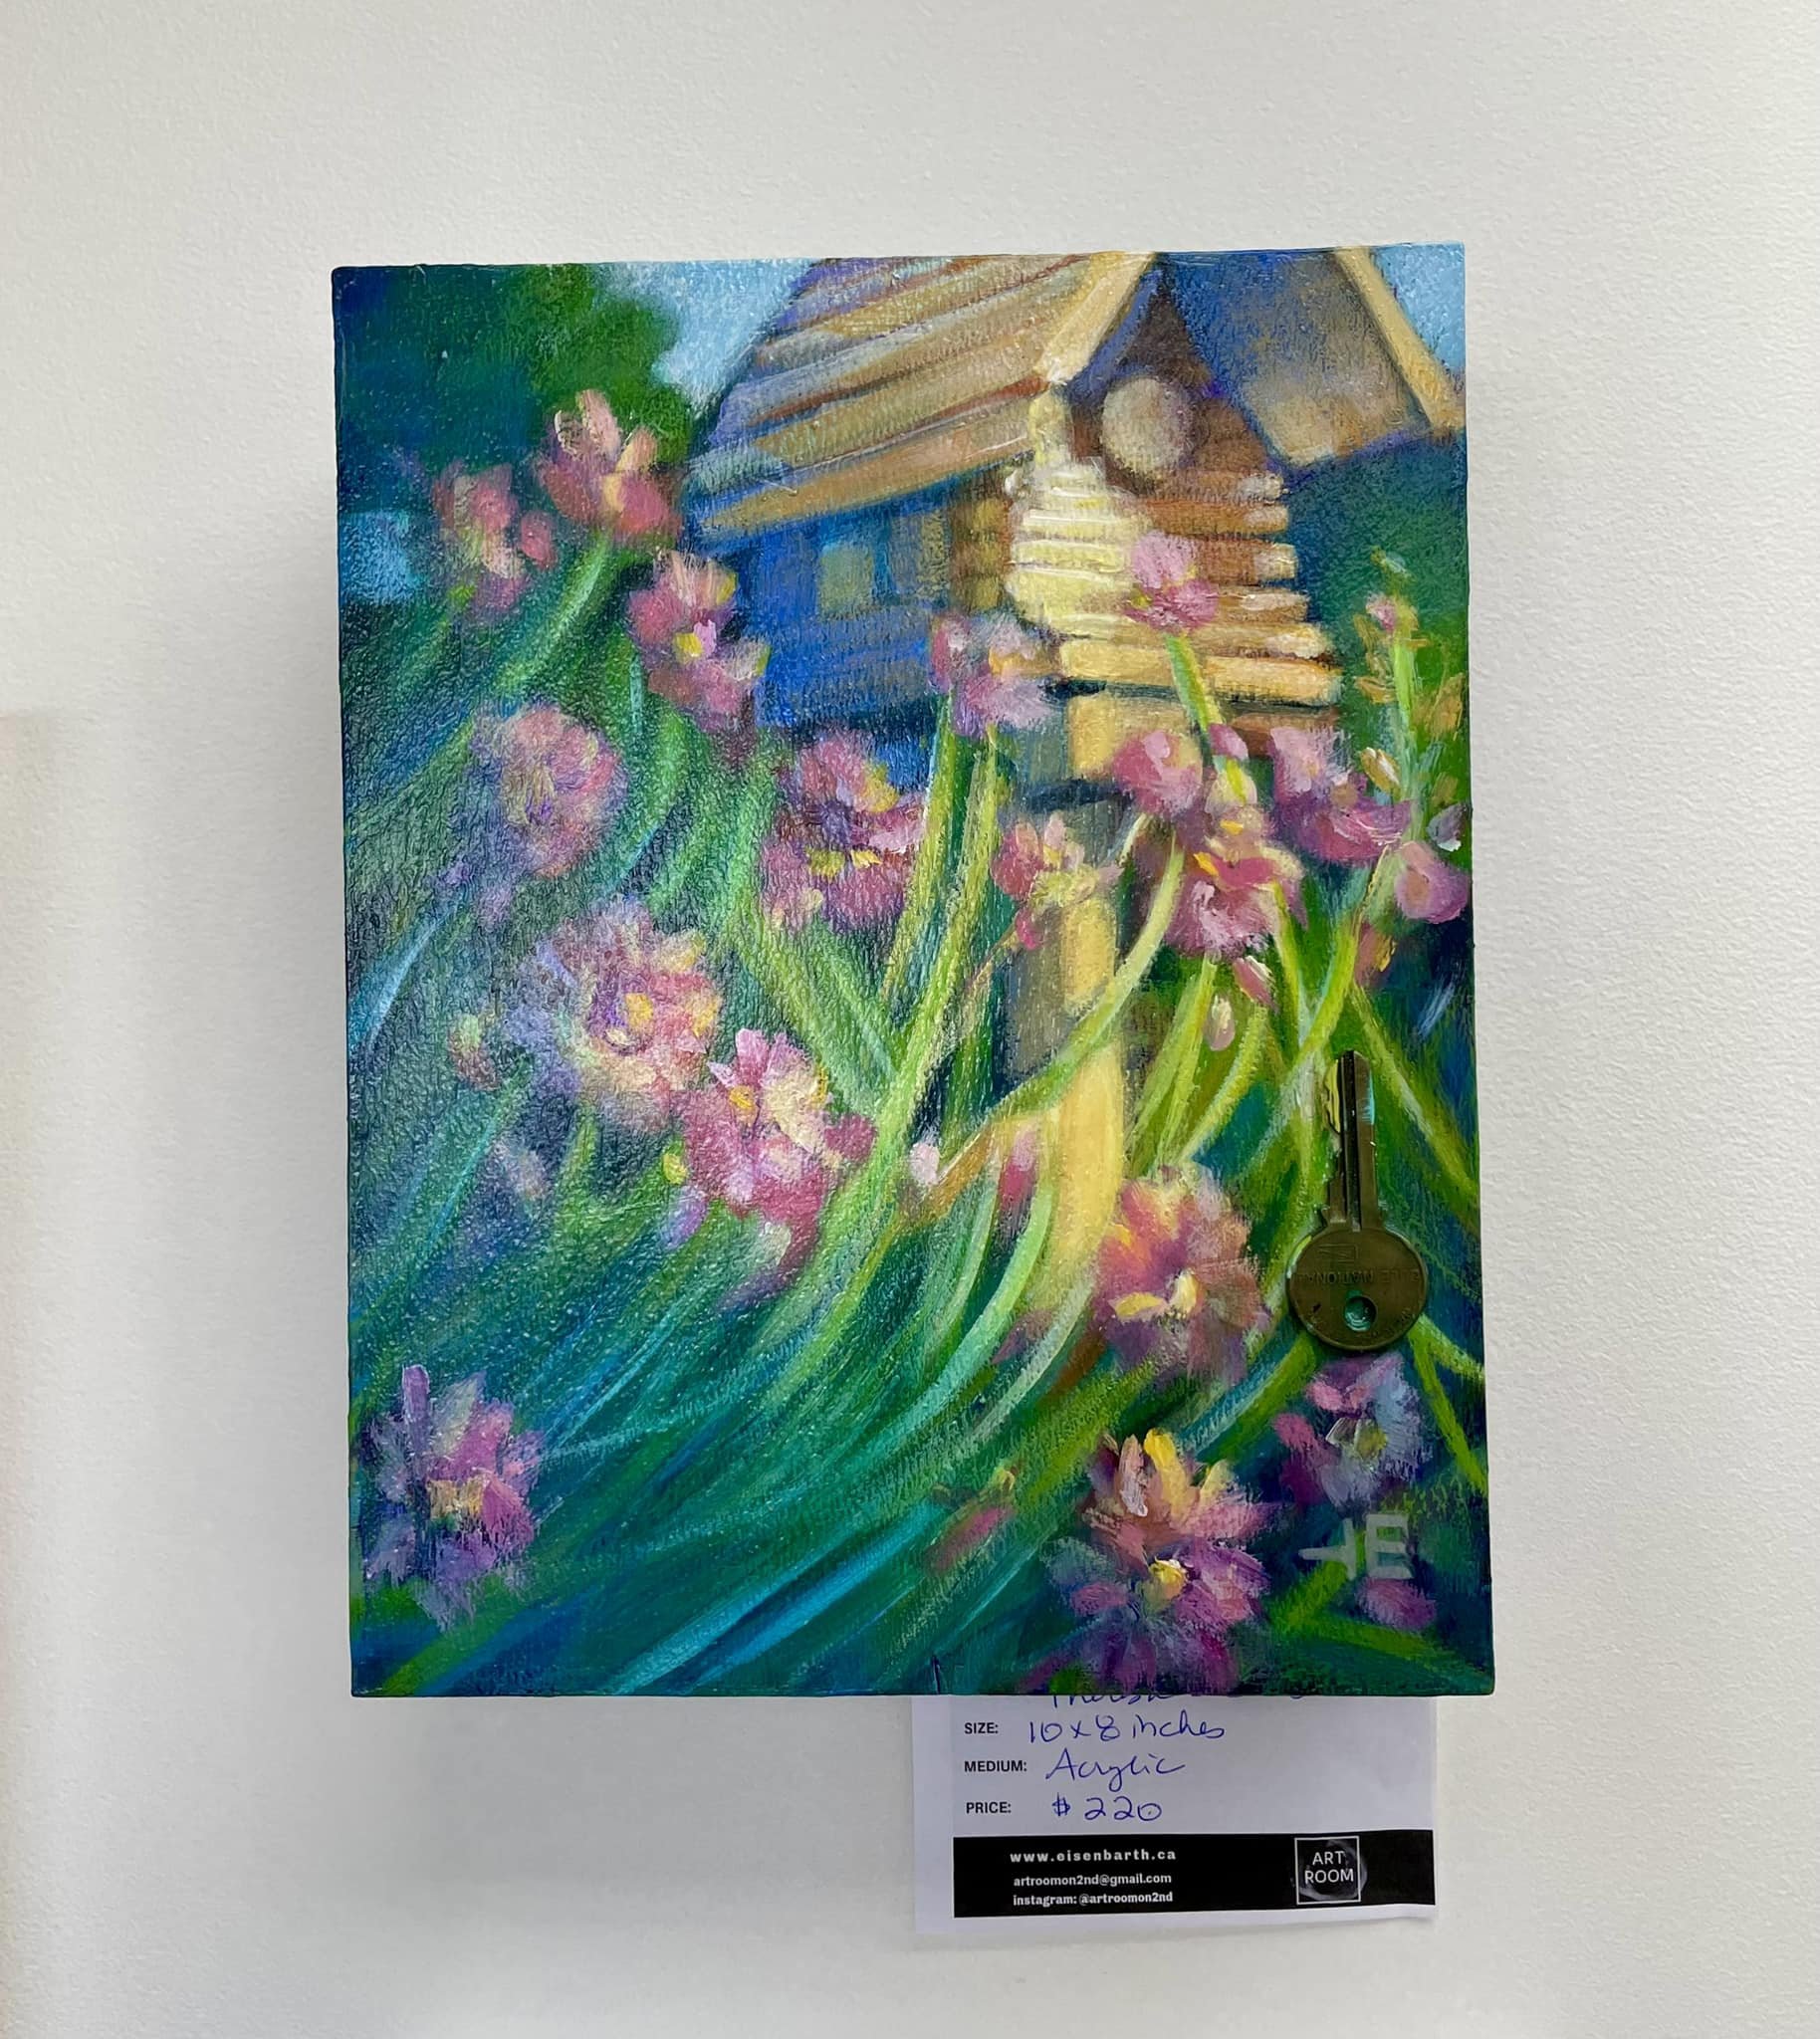 There's some artwork to brighten your Monday. 
Its now at the new Remax Medalta Art Gallery in Medicine Hat. 
Take a break from work today and go see the art:) 

GALLERY REGULAR HOURS: 
8:30 AM - 5 PM | MON-FRI
#109, 1235 SOUTHVIEW DR. SE MEDICINE HA